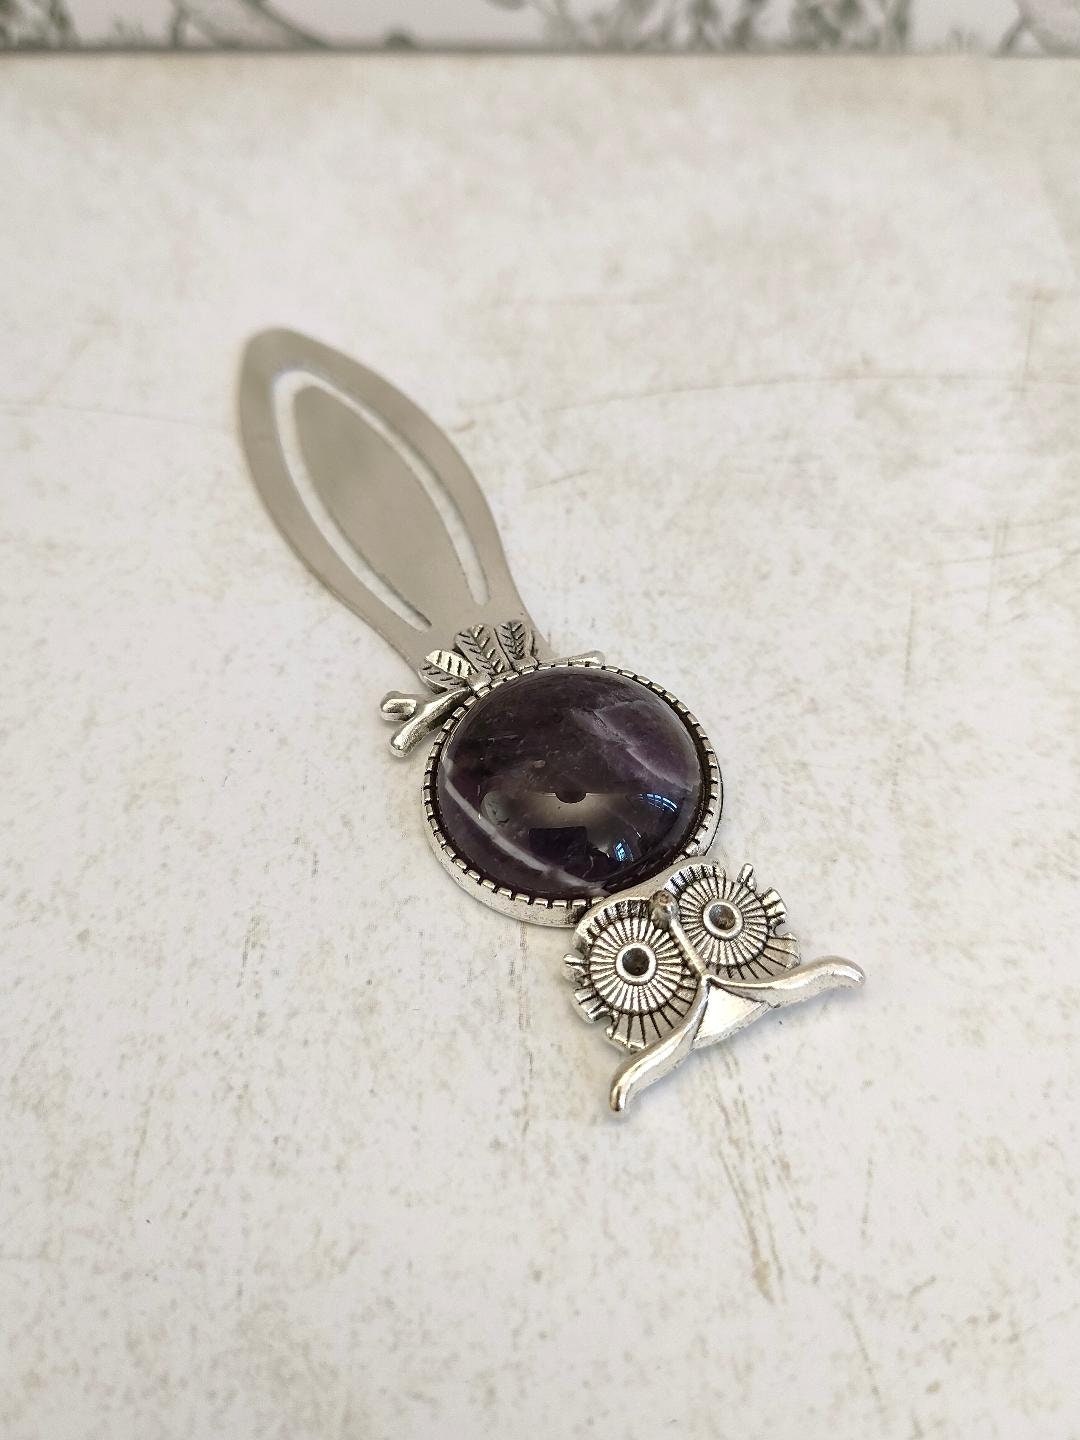 Vintage Owl Antique Silver Tibetan Style Alloy Bookmarks, Natural Amethyst Bookmarker, Gift for Book Lovers, Reading Accessories and Gfits